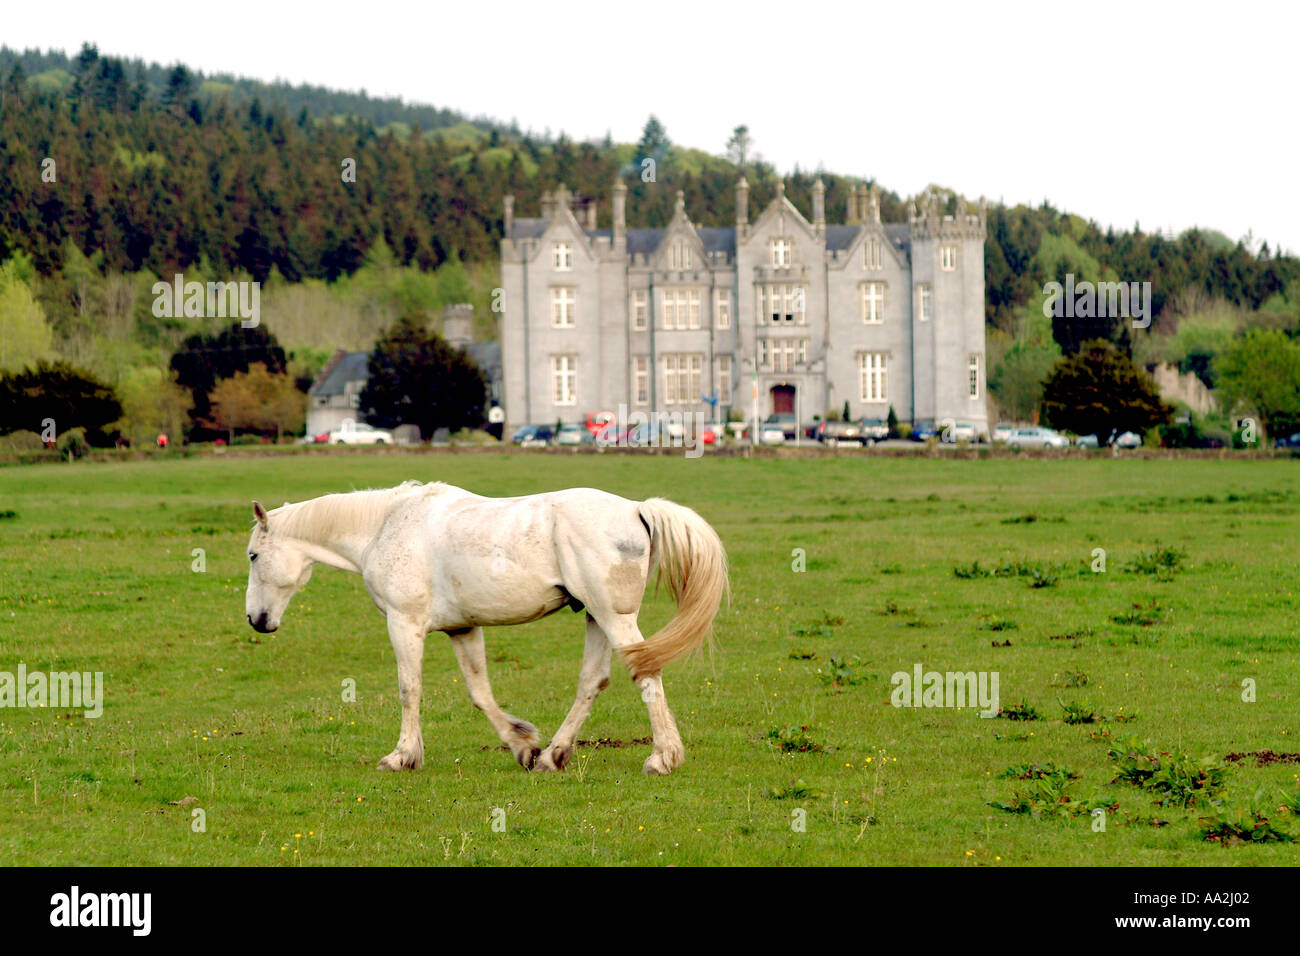 A white horse in front of Kinnity Castle in County Offaly, Ireland. Stock Photo